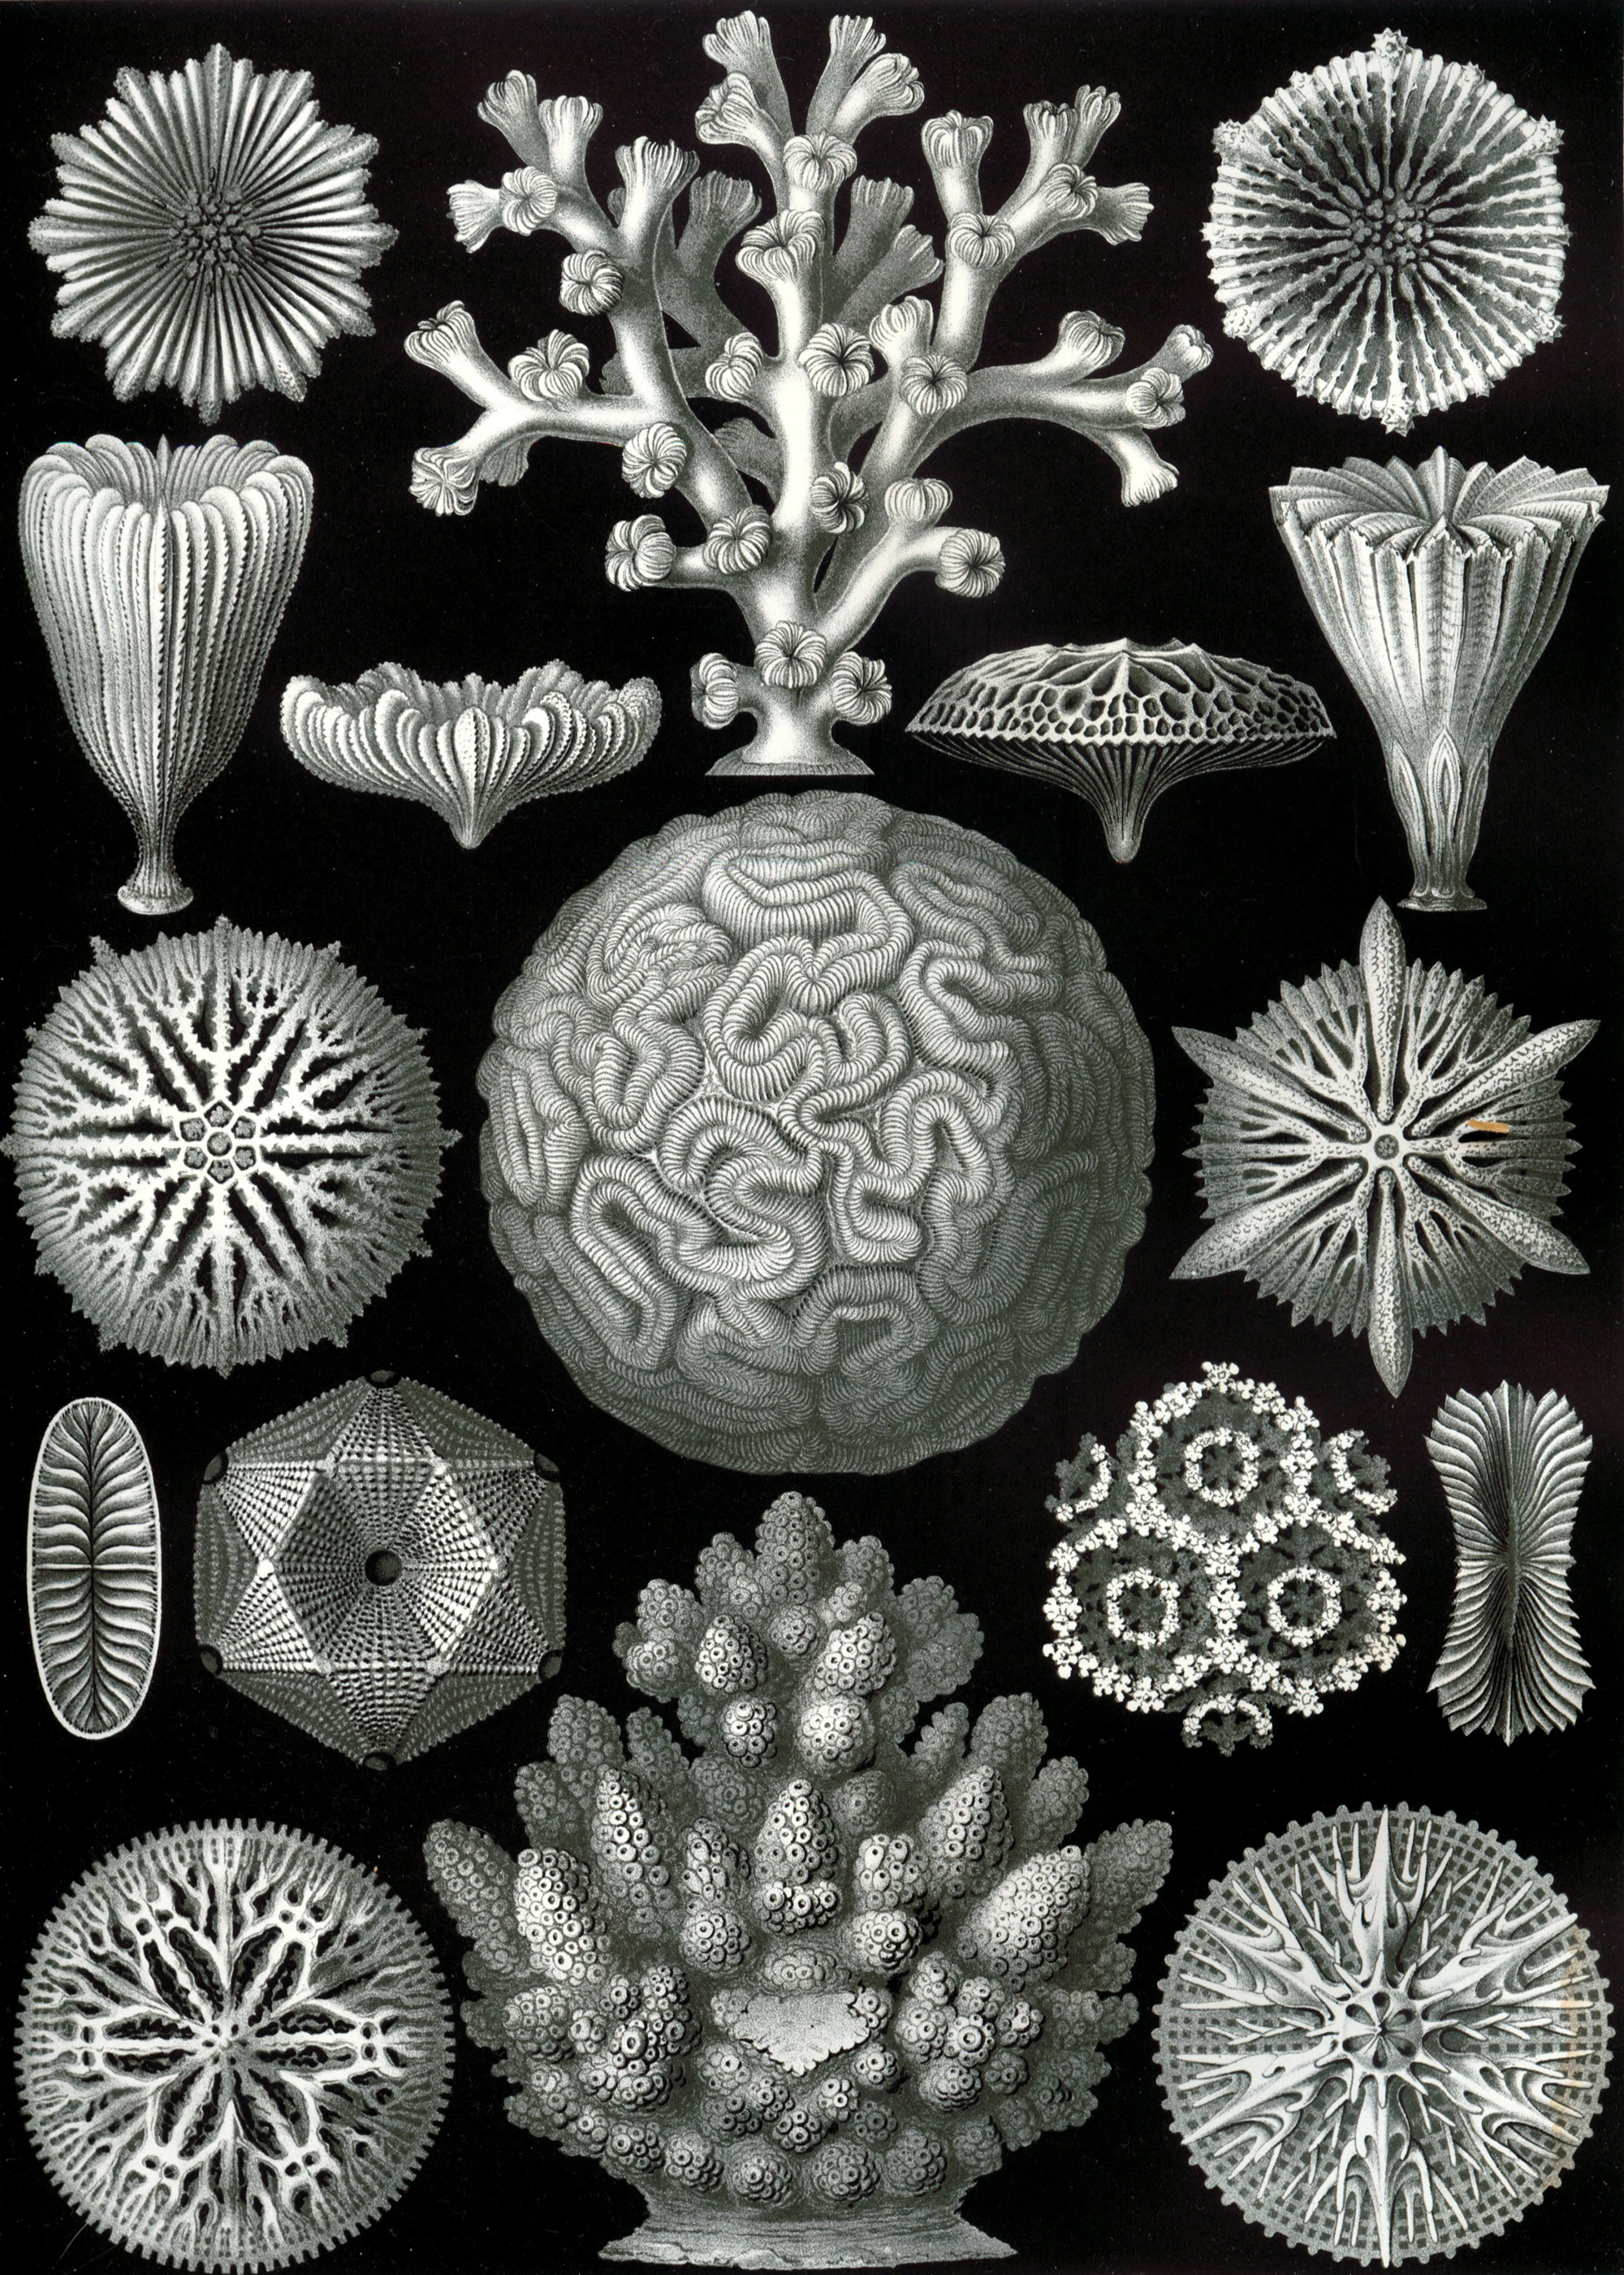 Art Forms in Nature, Plate 58: Hexacoralla by Ernst